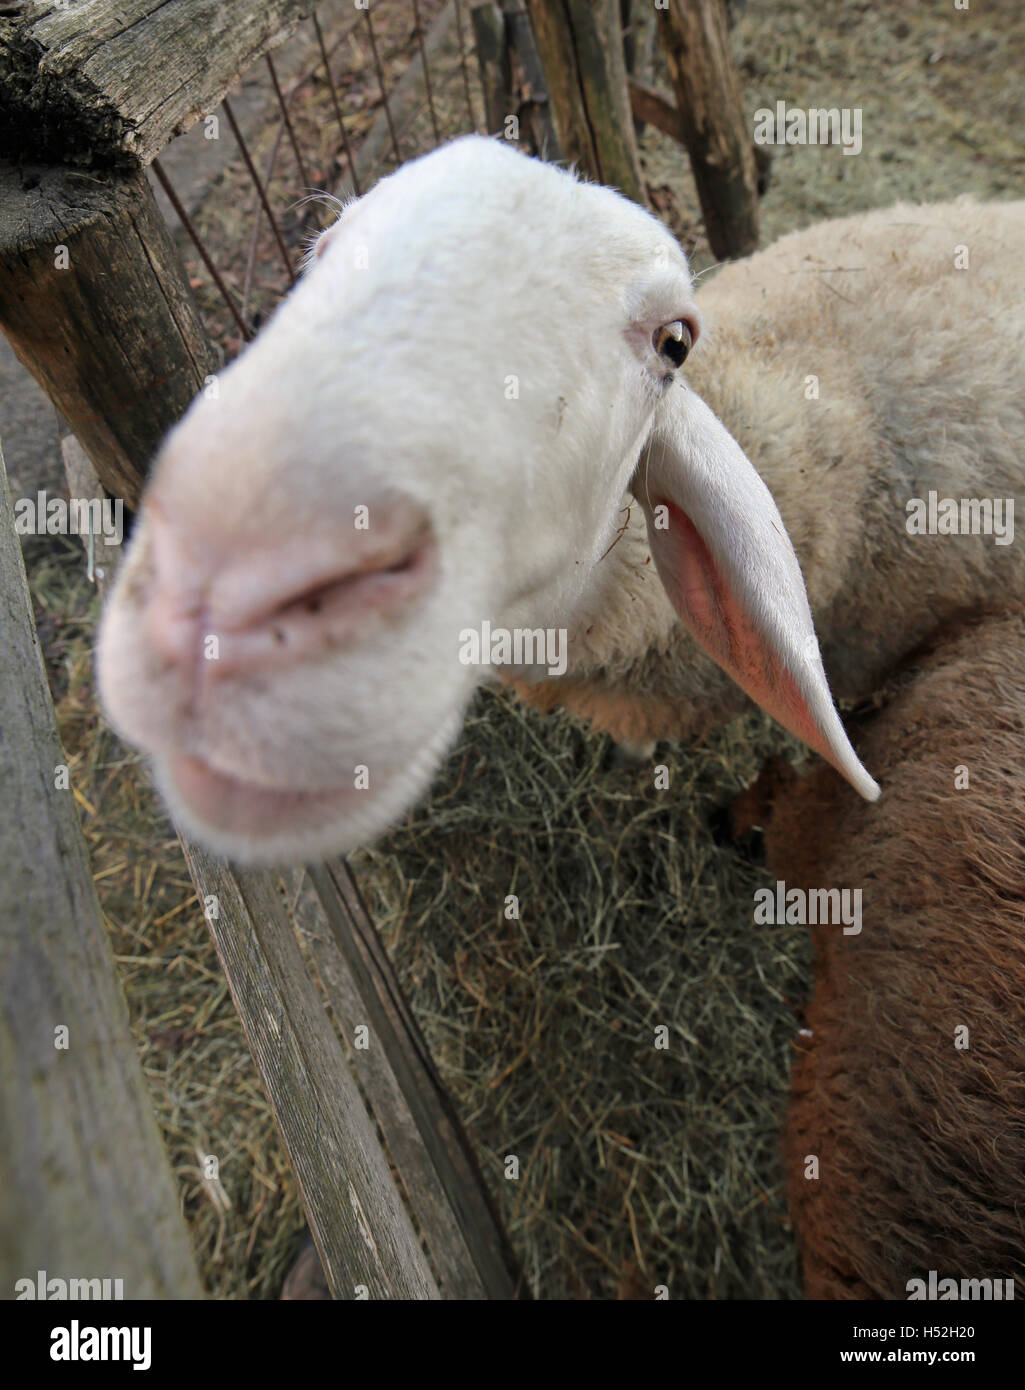 close muzzle of a sheep photographed with fisheye lens Stock Photo